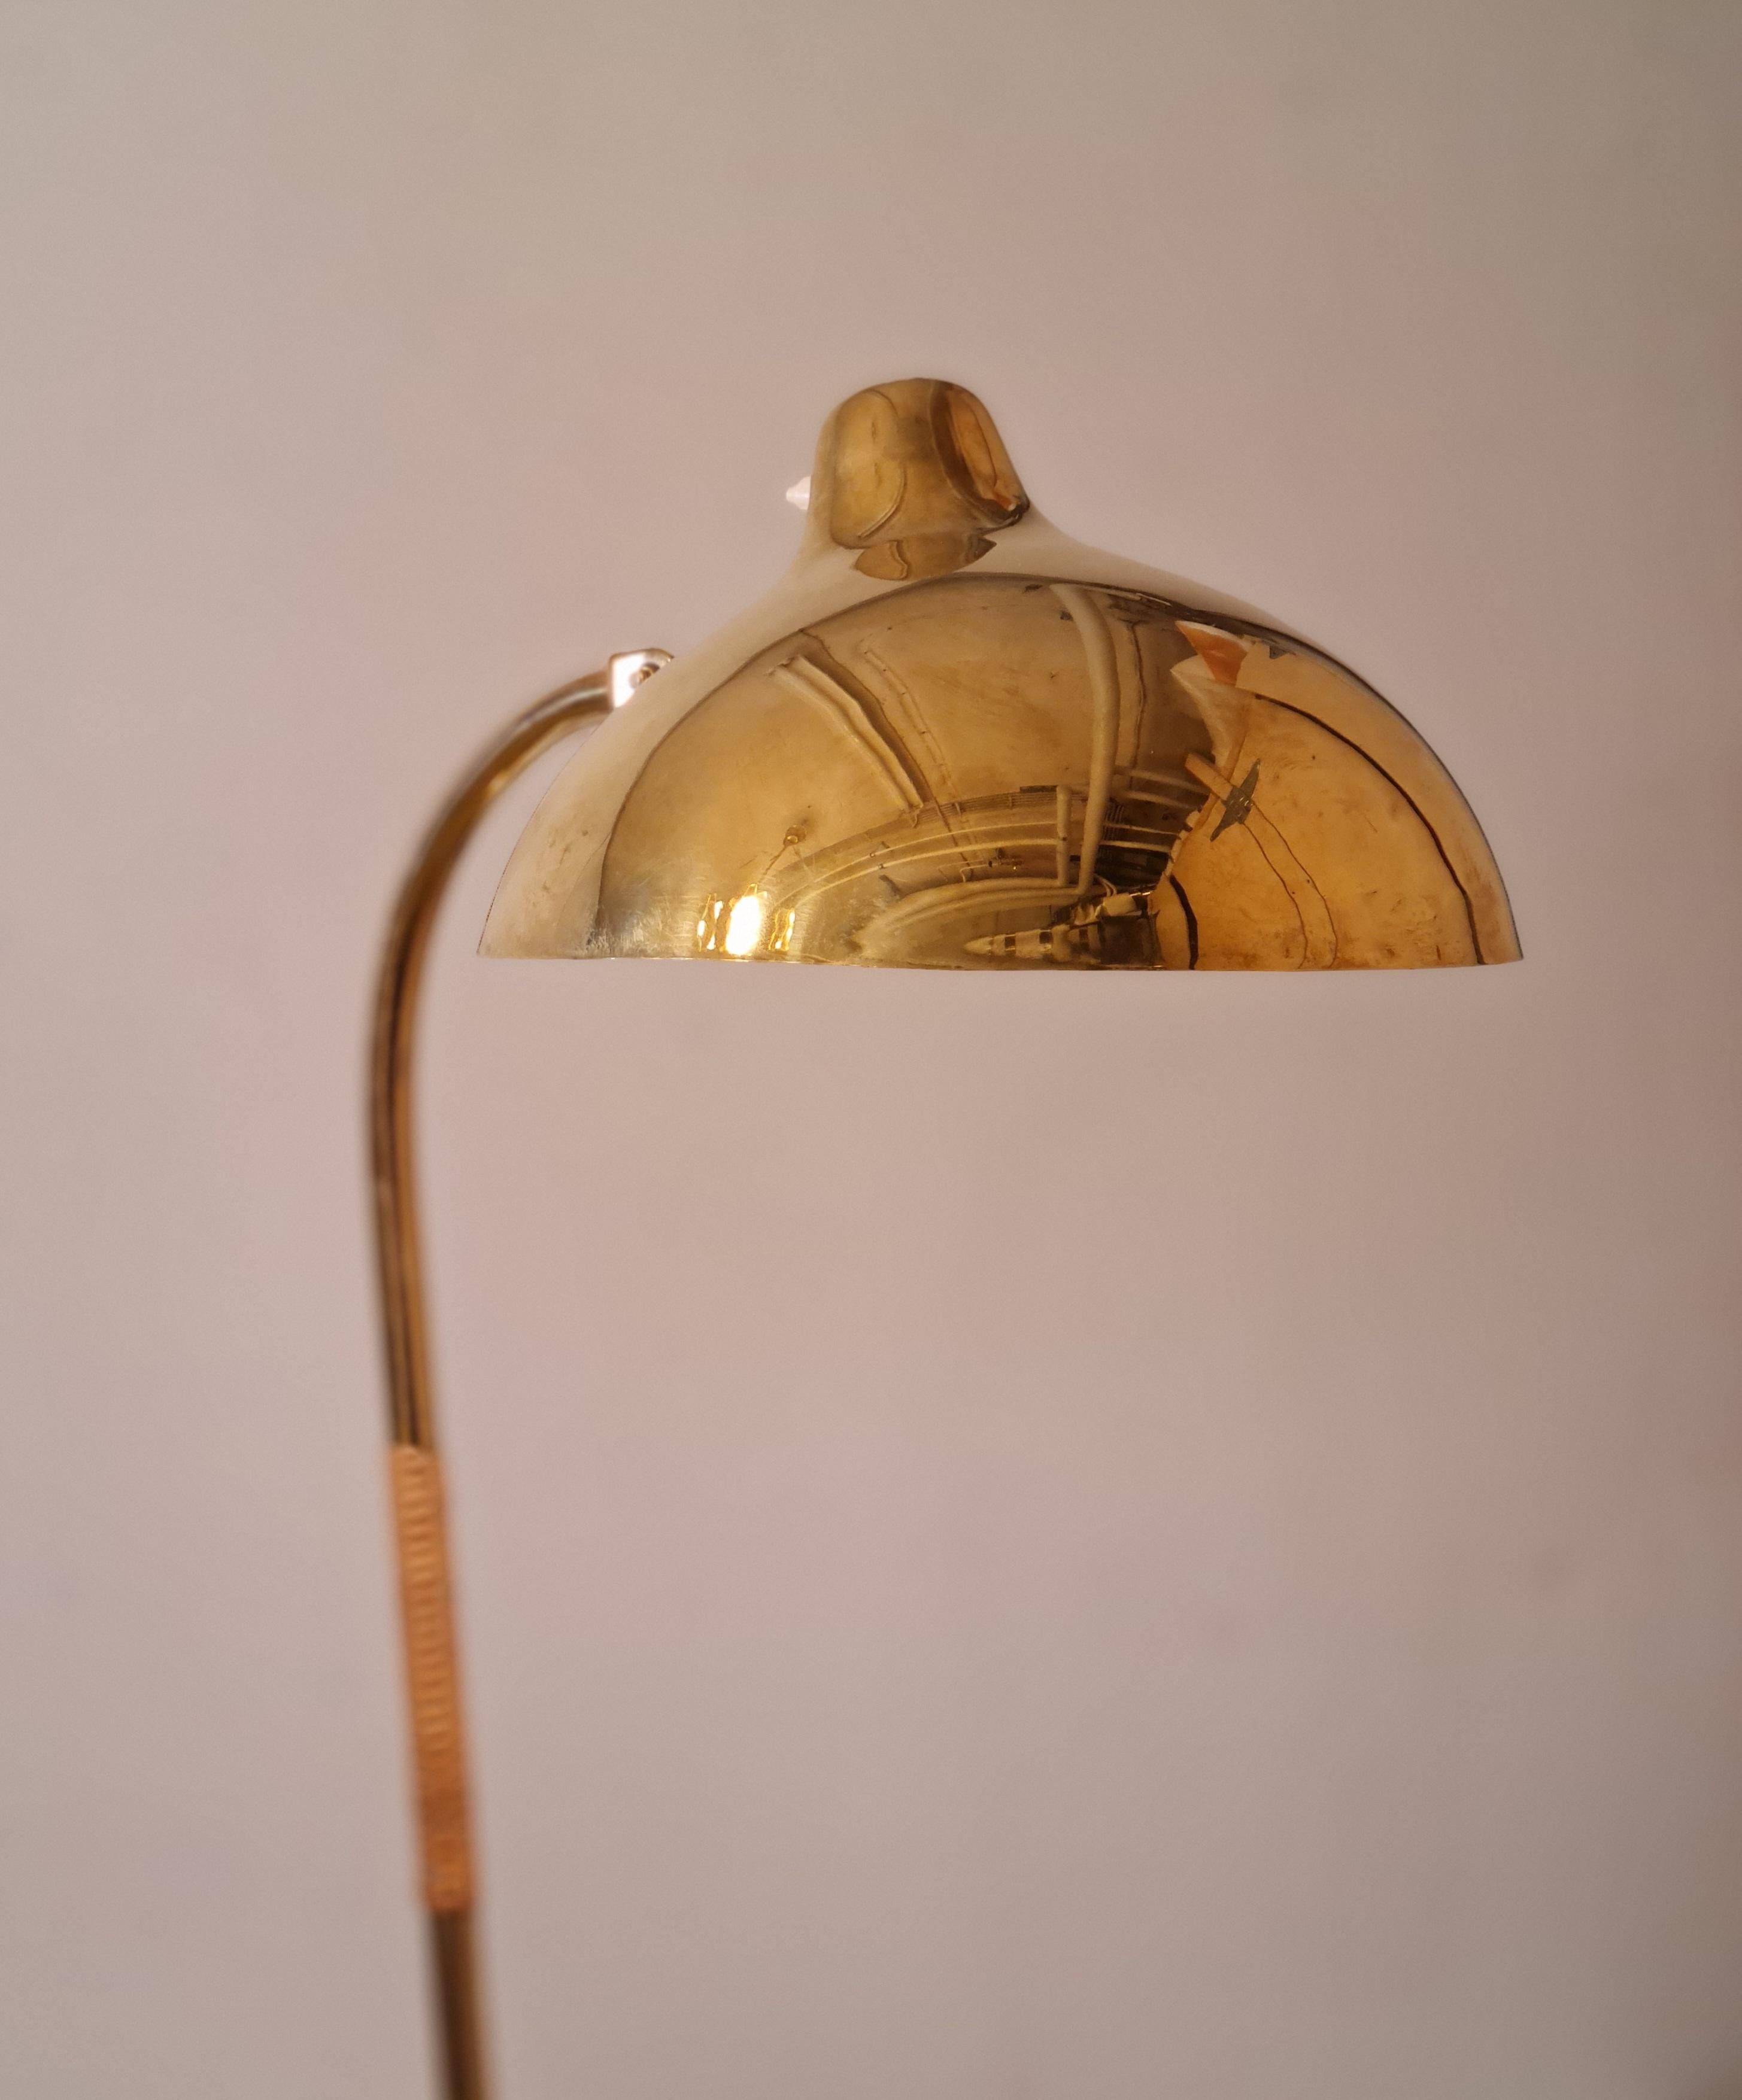 Exceedingly Rare Gunnel Nyman Floor Lamp Model No. 62044 by Idman, 1940 For Sale 4